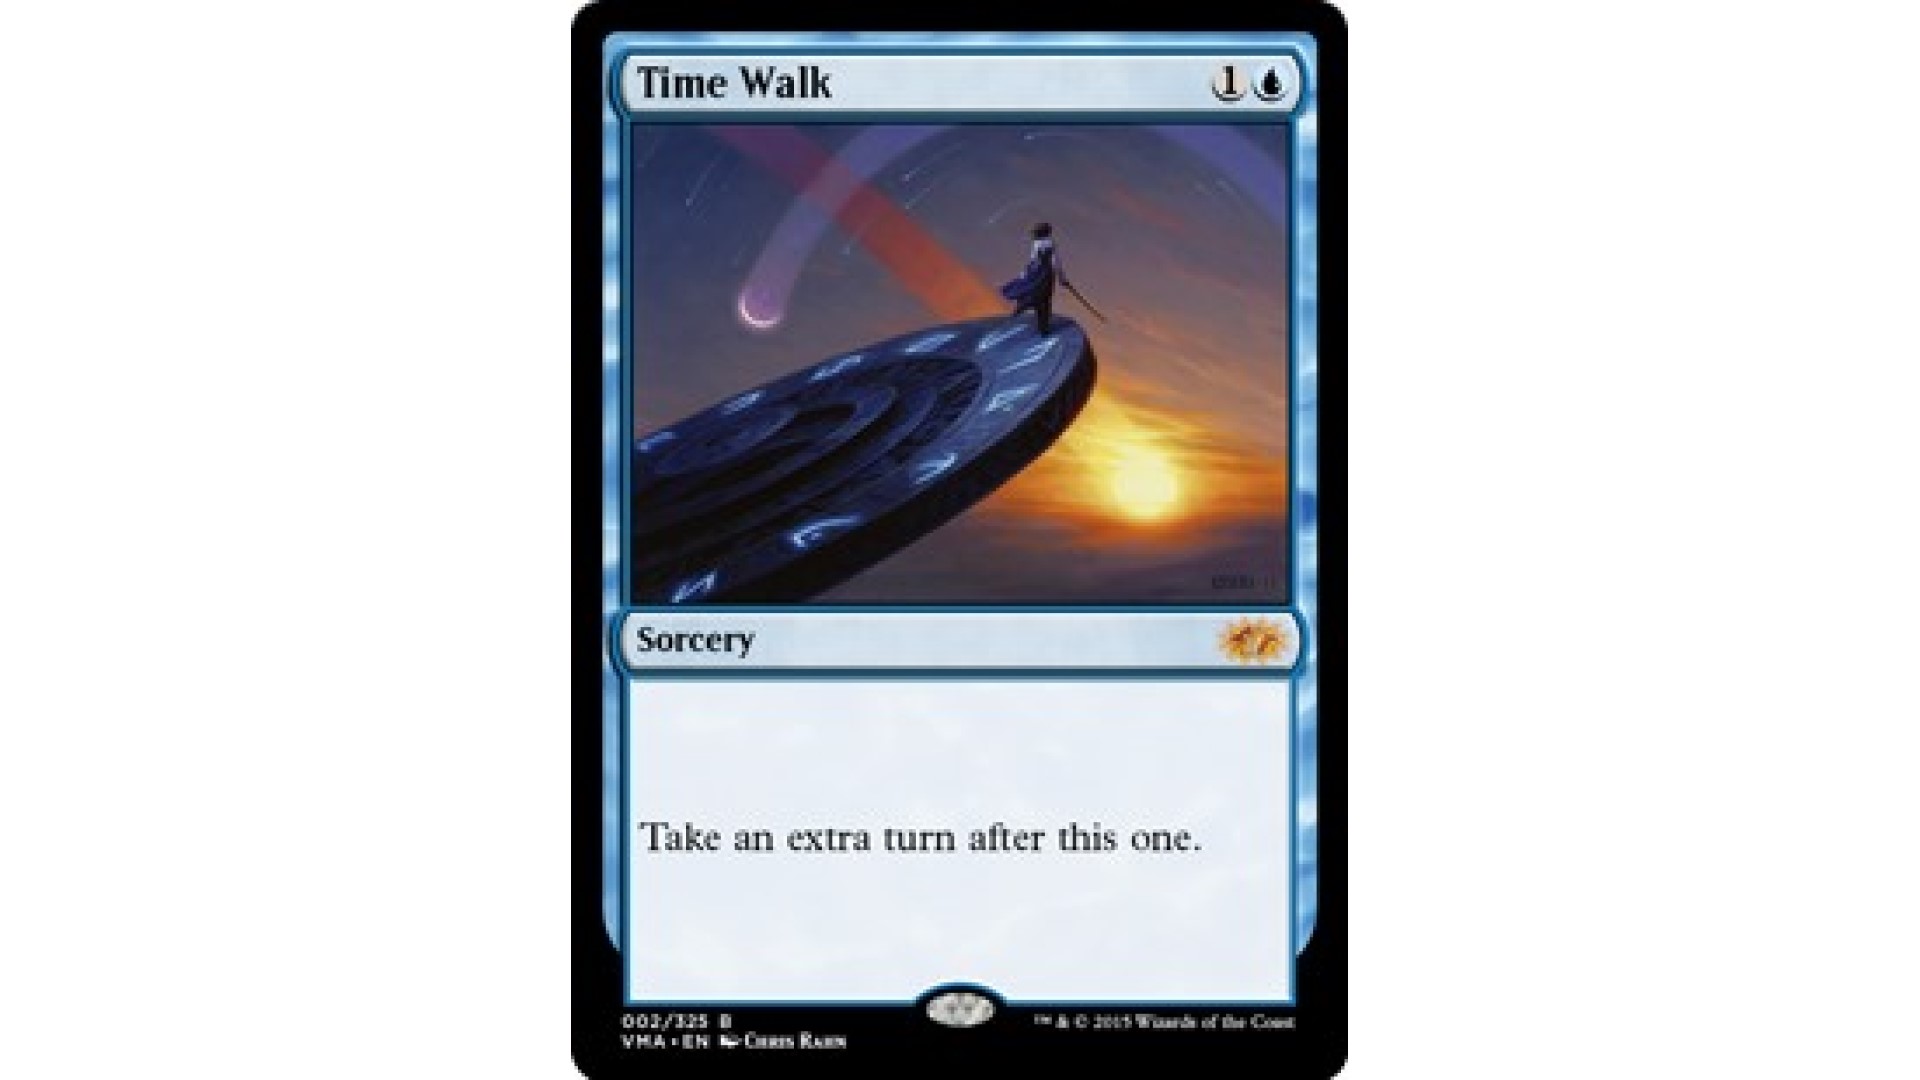 The MTG Power 9 card Time Walk